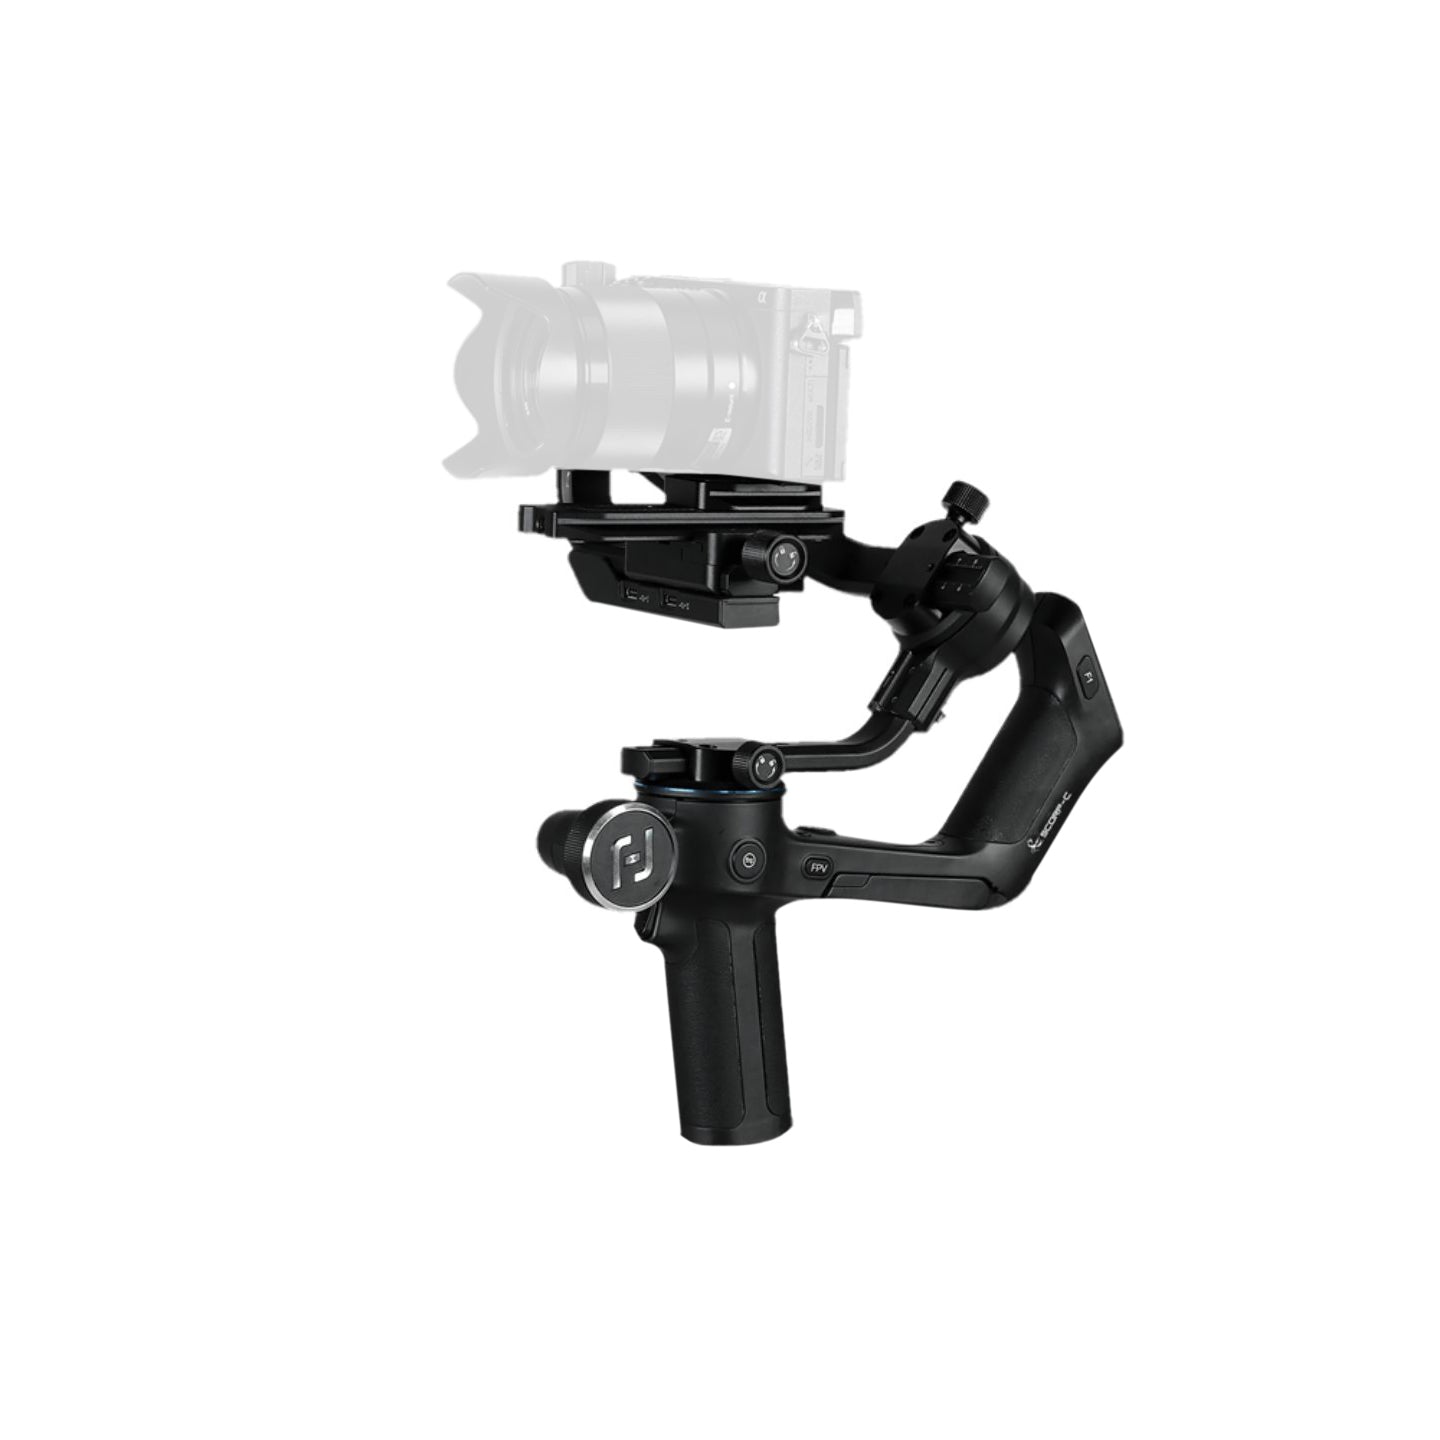 FeiyuTech SCORP C 3-Axis Handheld Gimbal Stabilizer for DSLR & Mirrorless Camera with LCD Touchscreen, 2.5kg Weight Capacity, 13hr Battery Runtime